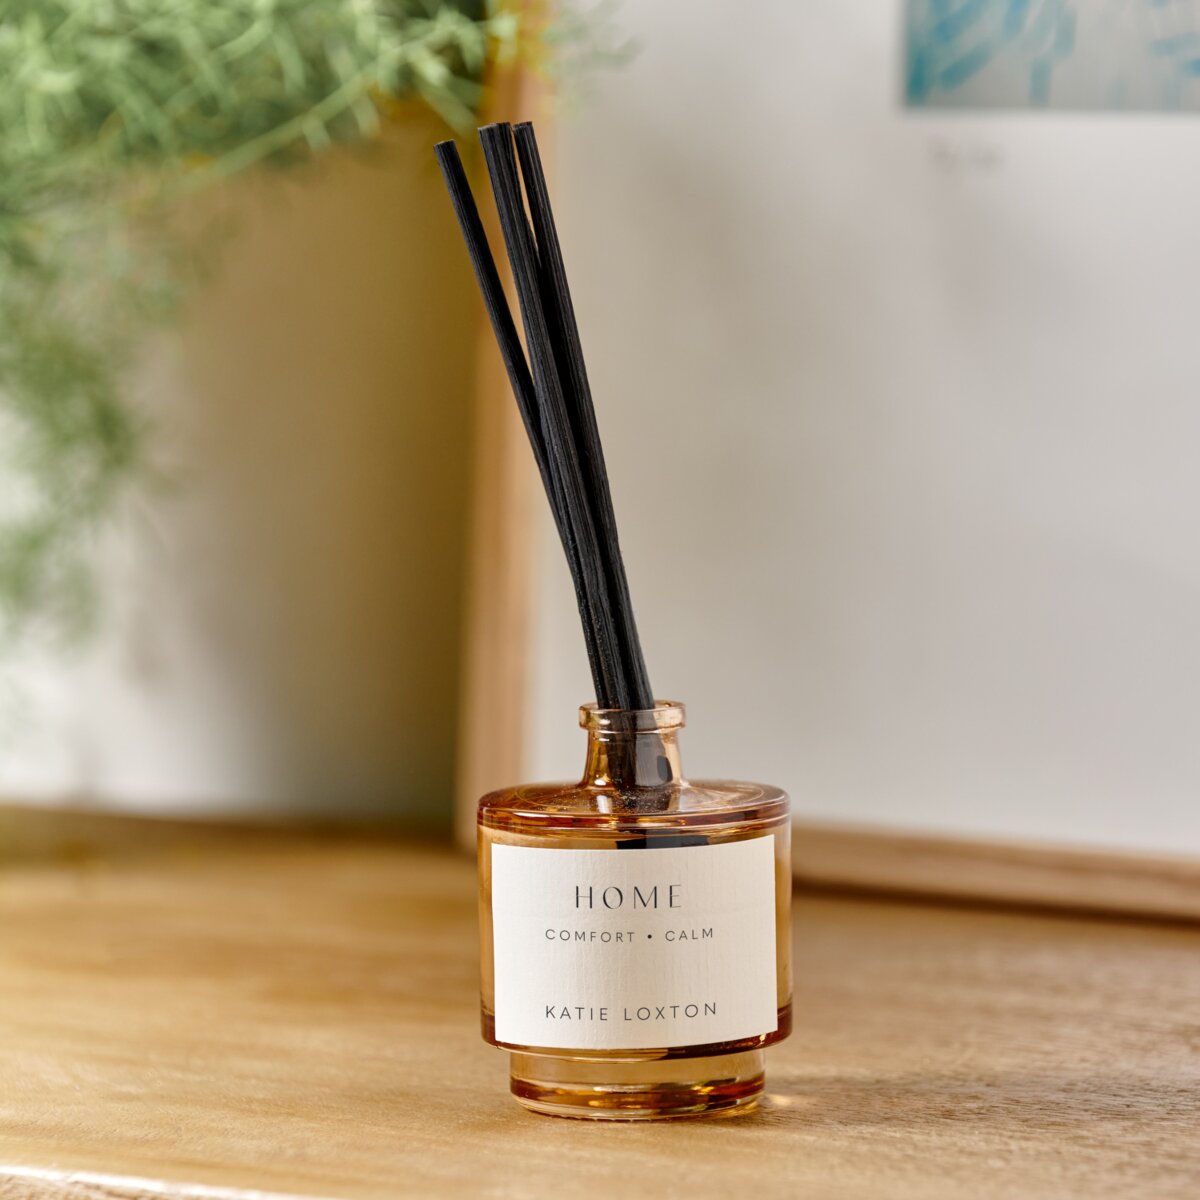 reed diffuser with amber glass and black reeds with 'Home' on the label